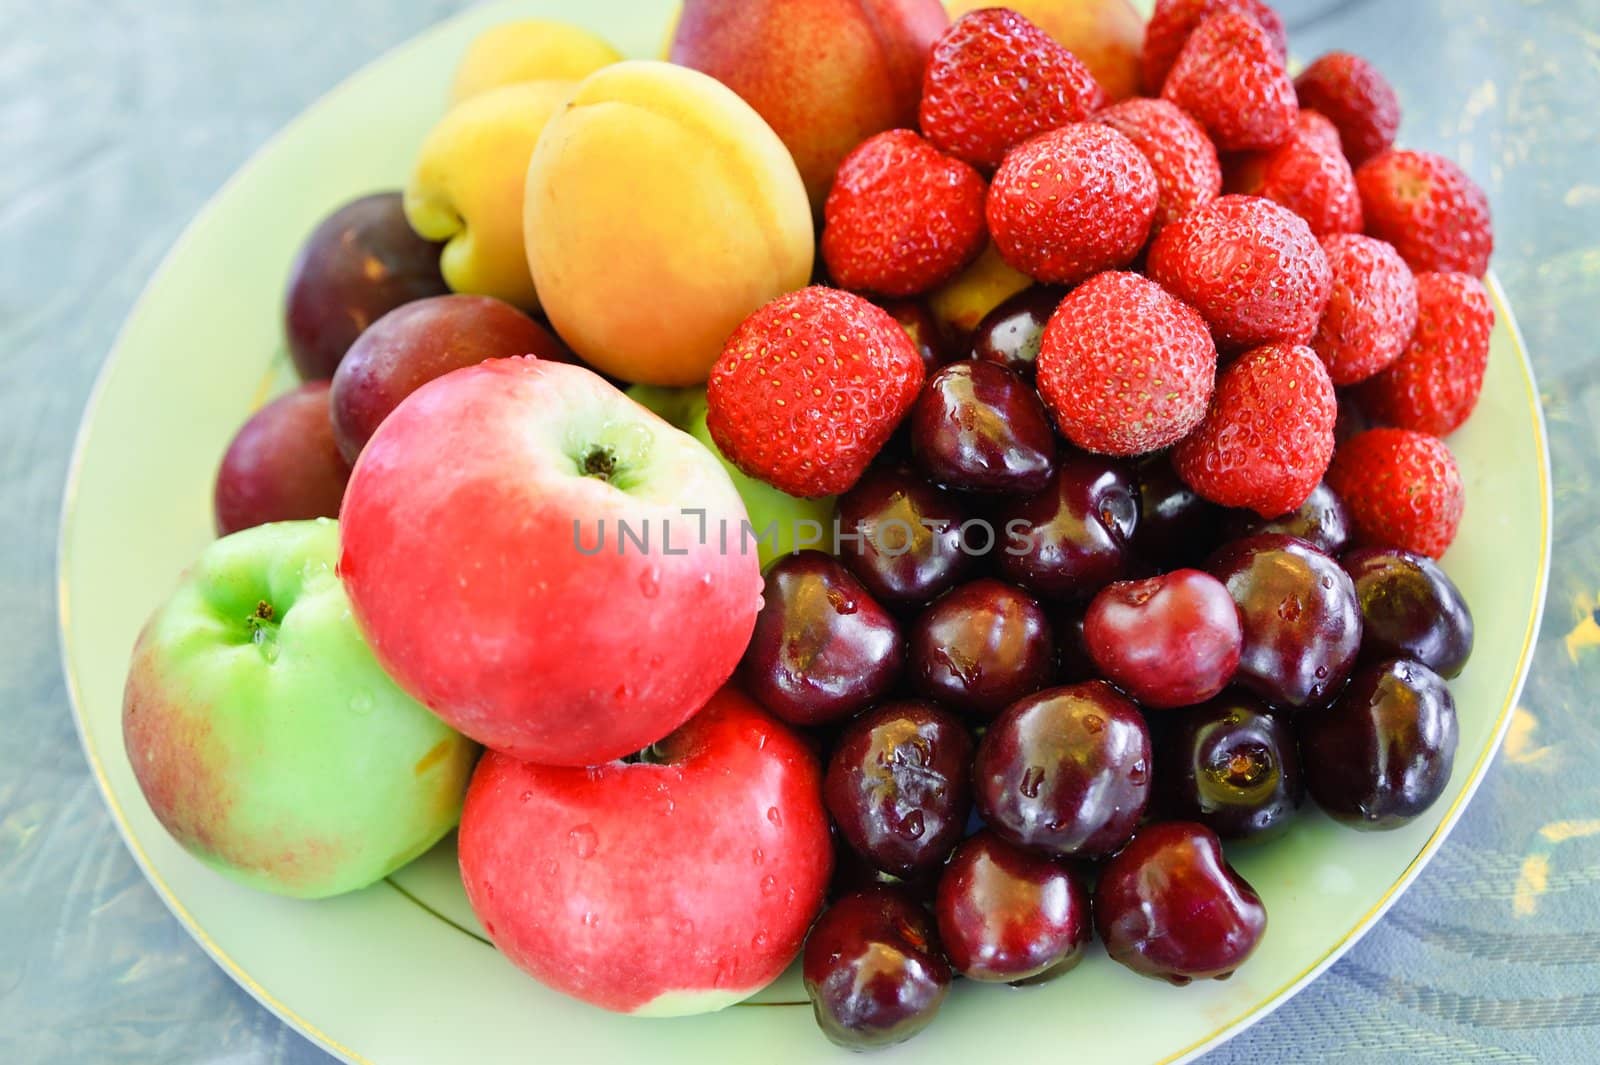 A plate of mixed fruits by oguzdkn